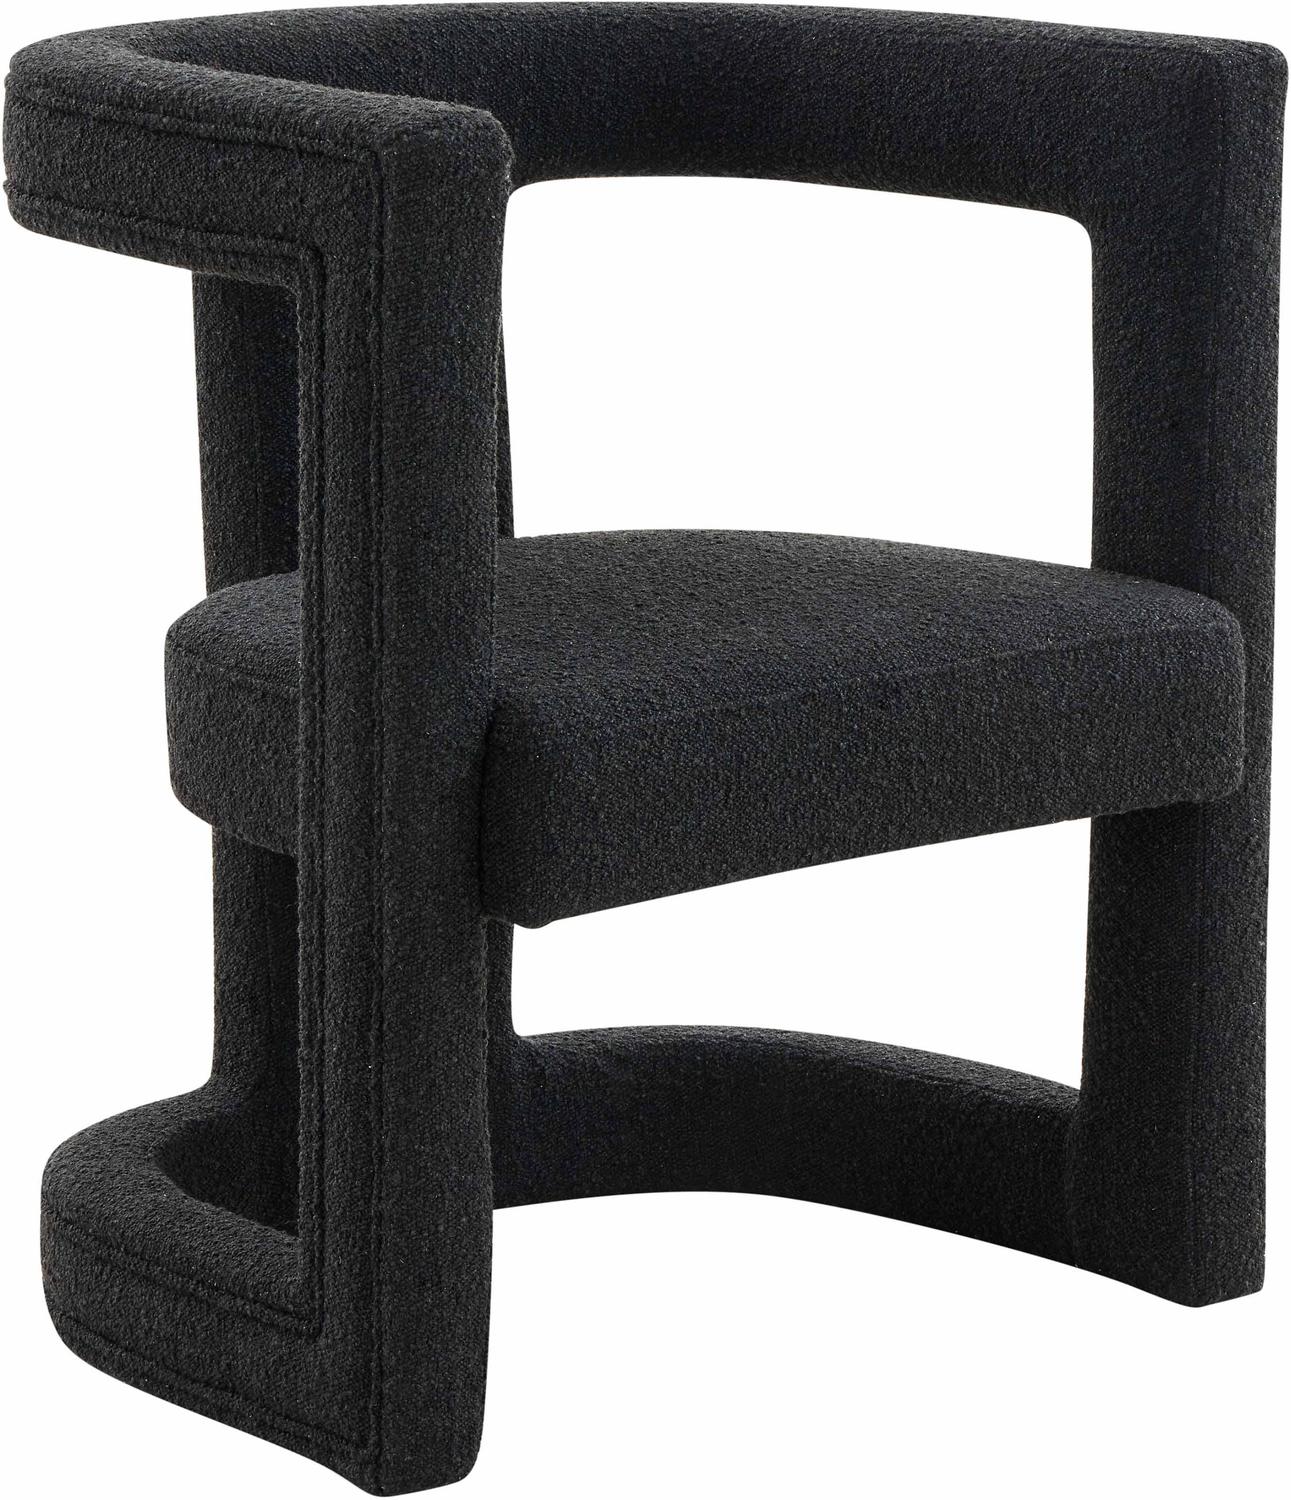 comfortable club chairs Tov Furniture Accent Chairs Black